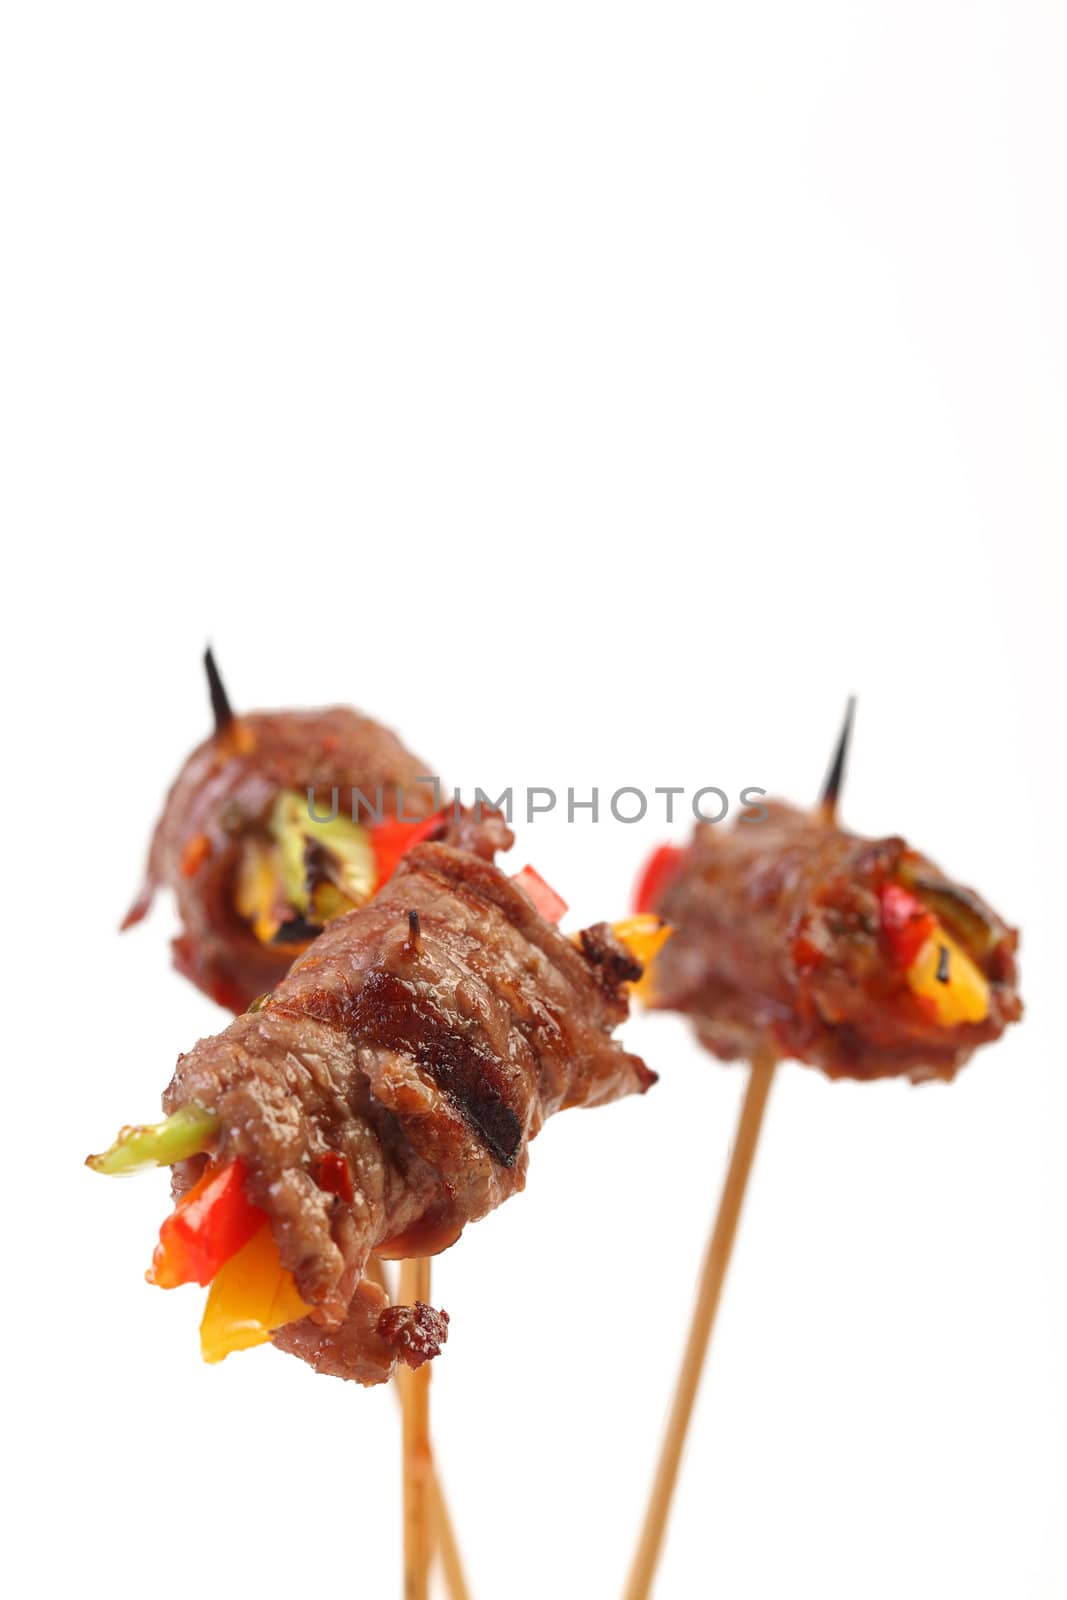 Appetizer Finger food with meat on sticks